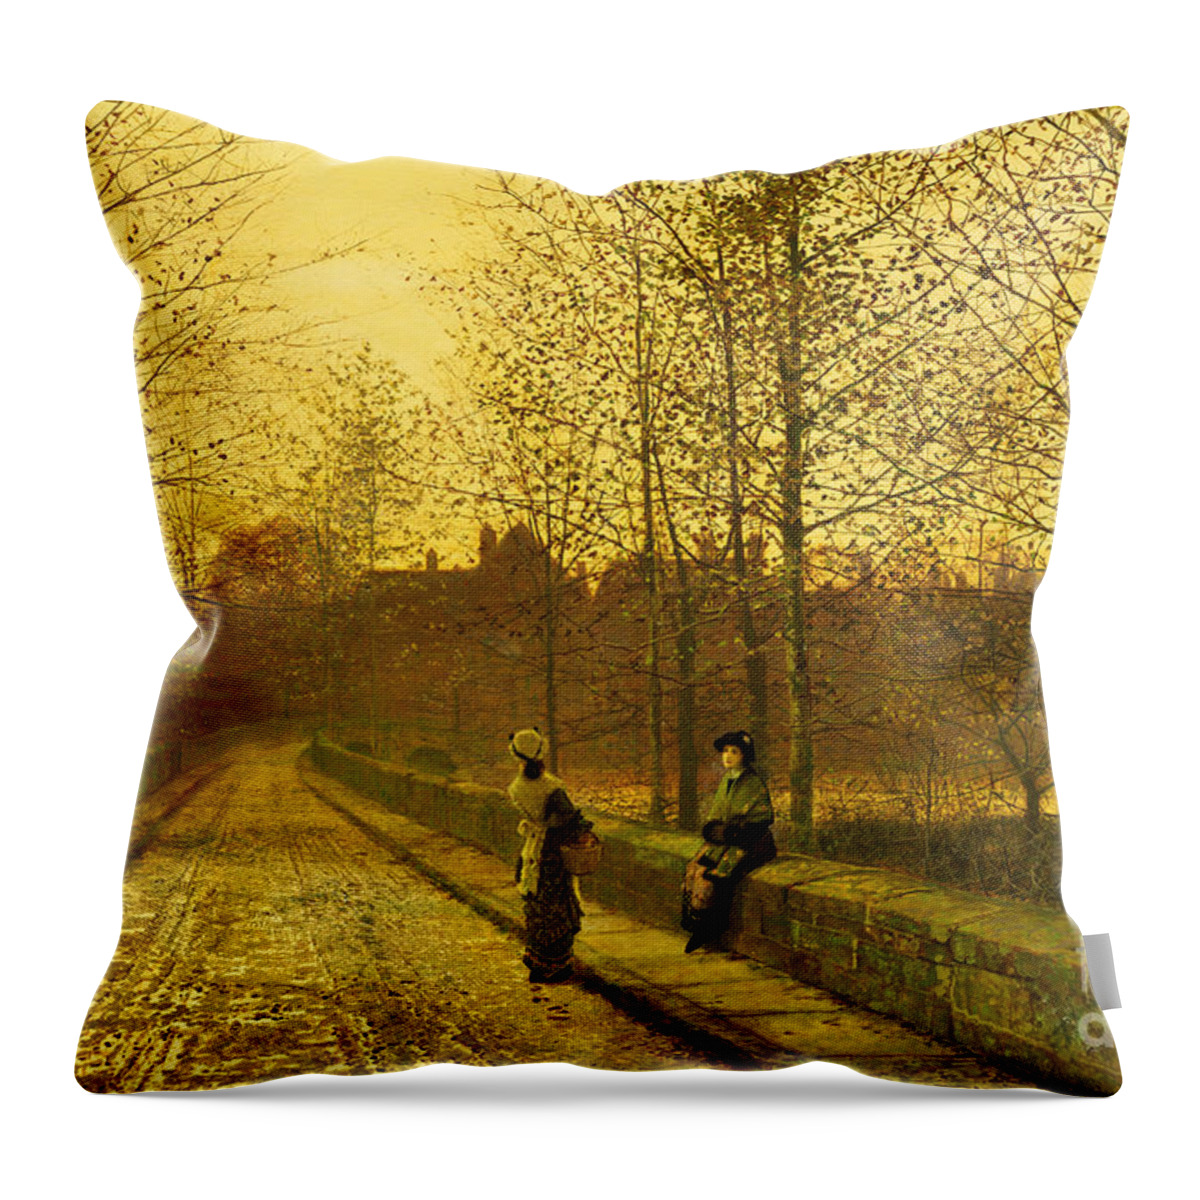 The Throw Pillow featuring the painting In the Golden Gloaming by John Atkinson Grimshaw